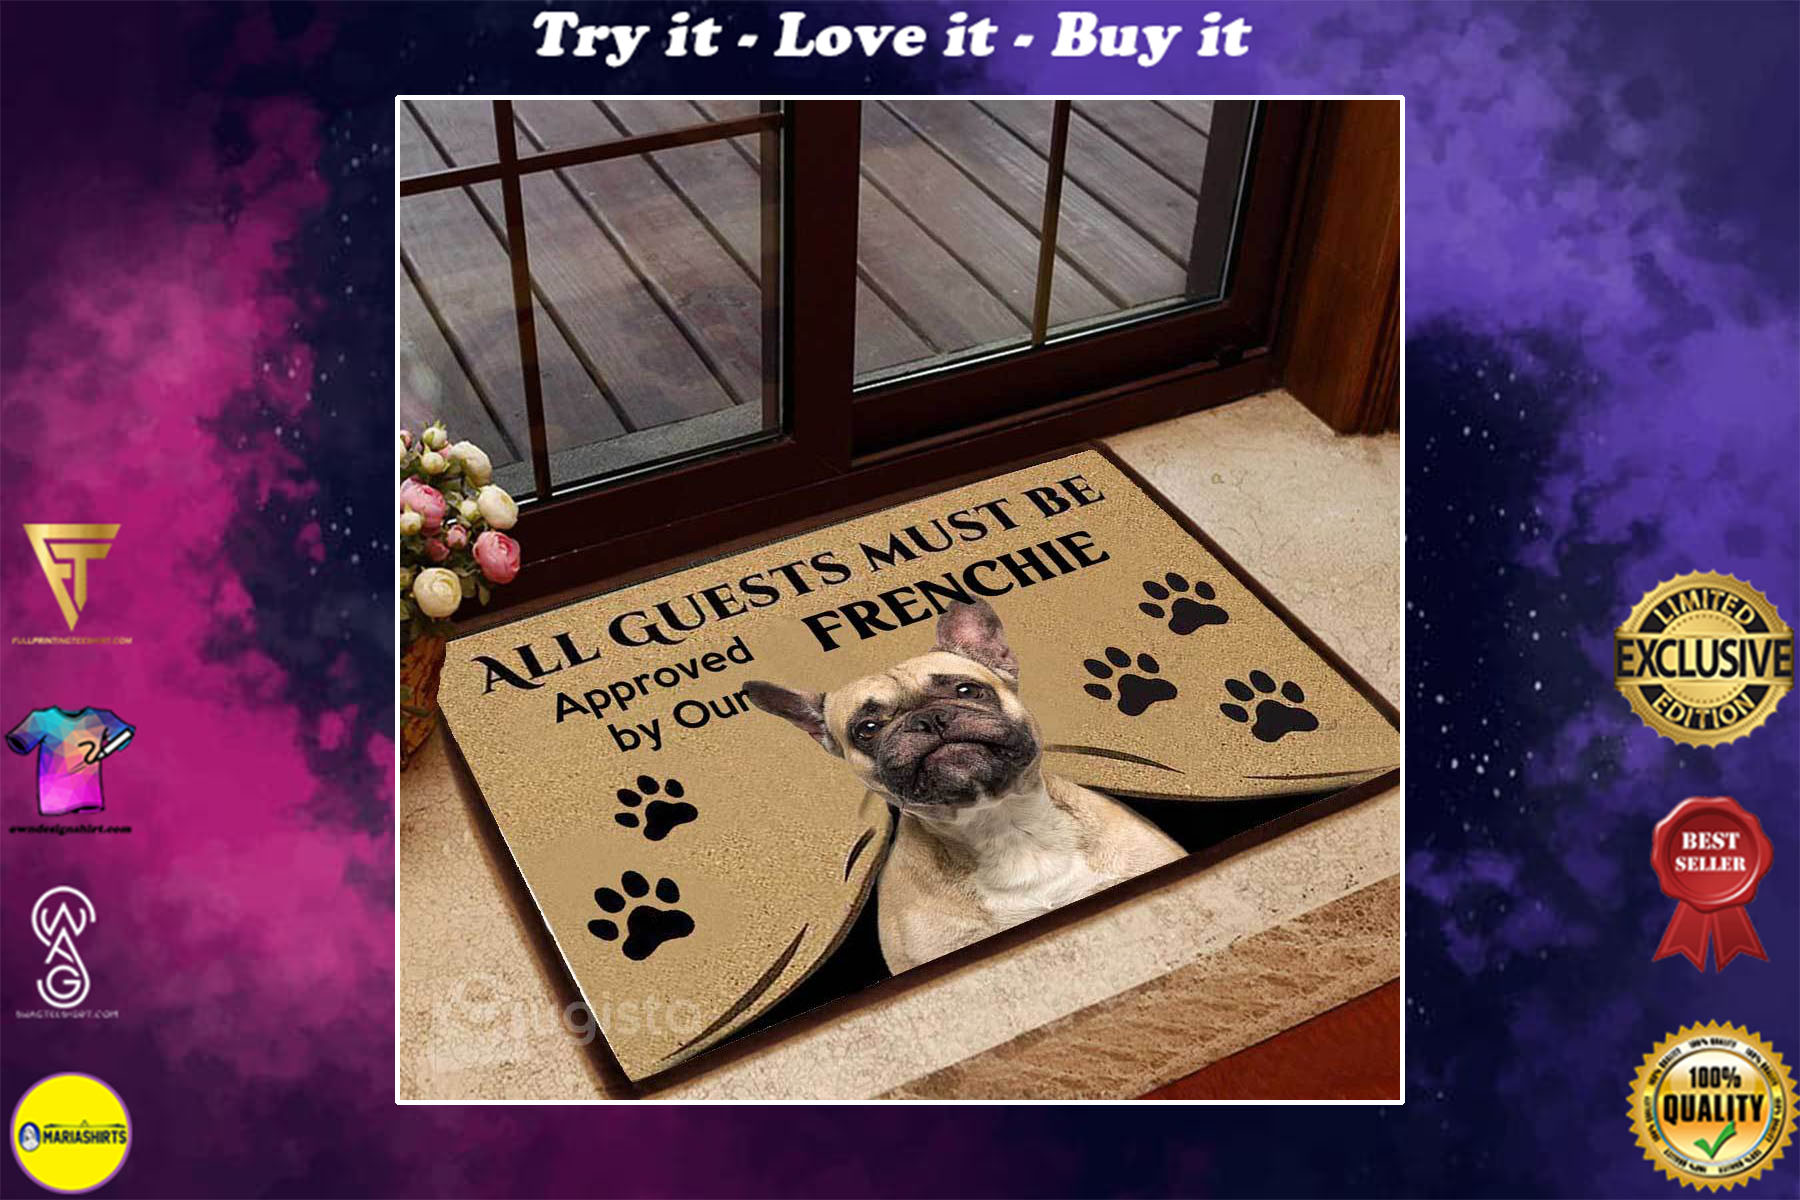 all guests must be approved by our frenchie doormat